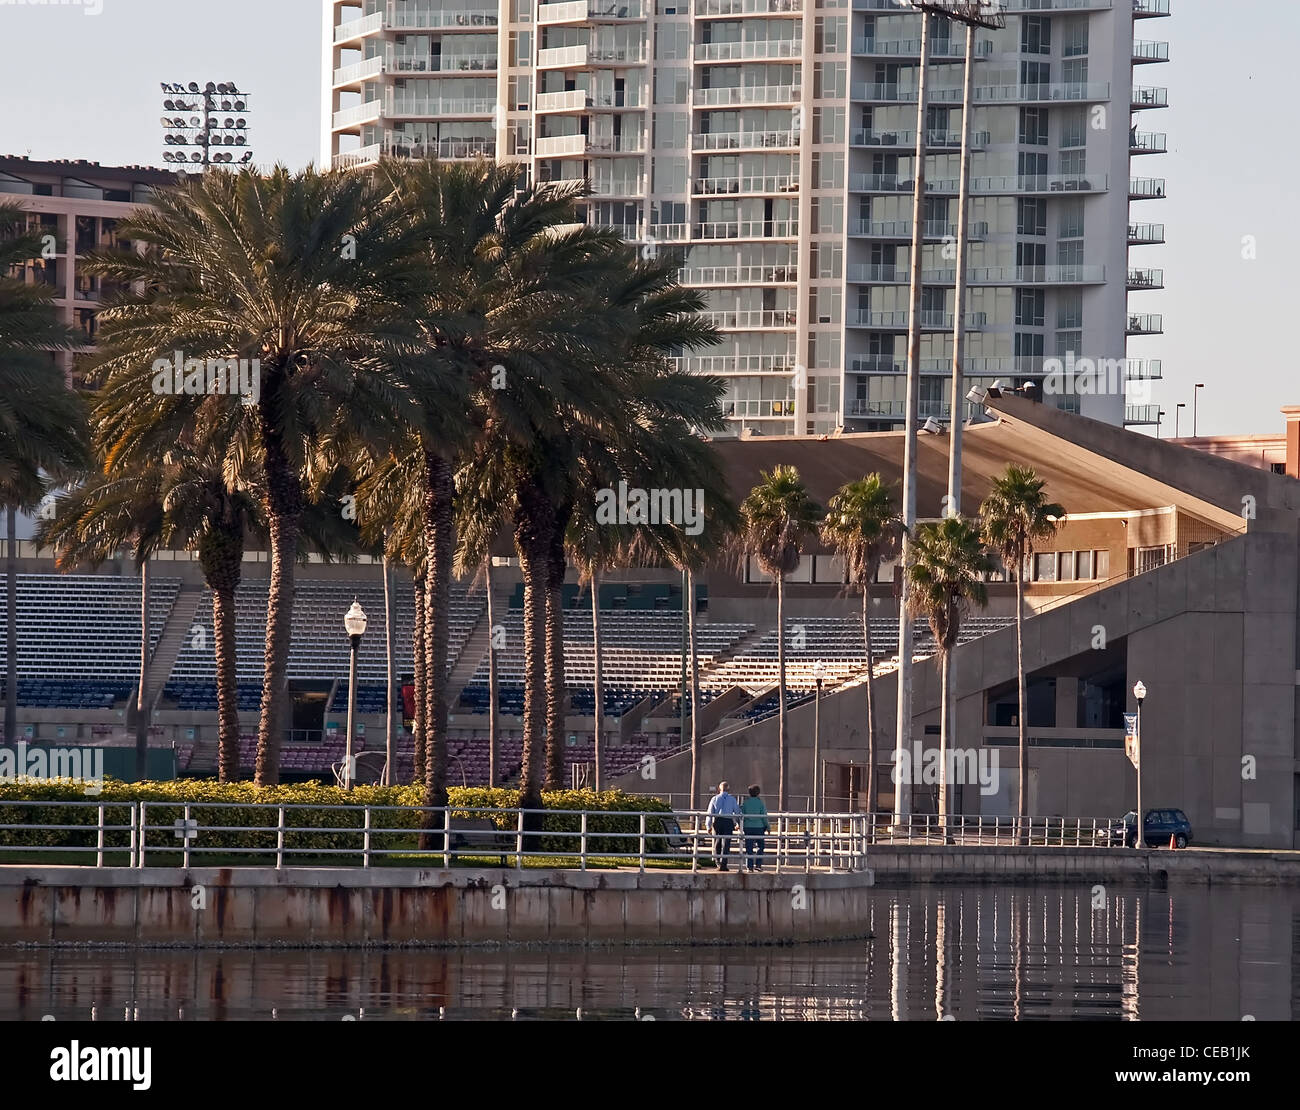 St. Petersburg downtown stadium in Mahaffey Theater/ Progress Energy complex, on waterfront. City landscape in background. Stock Photo